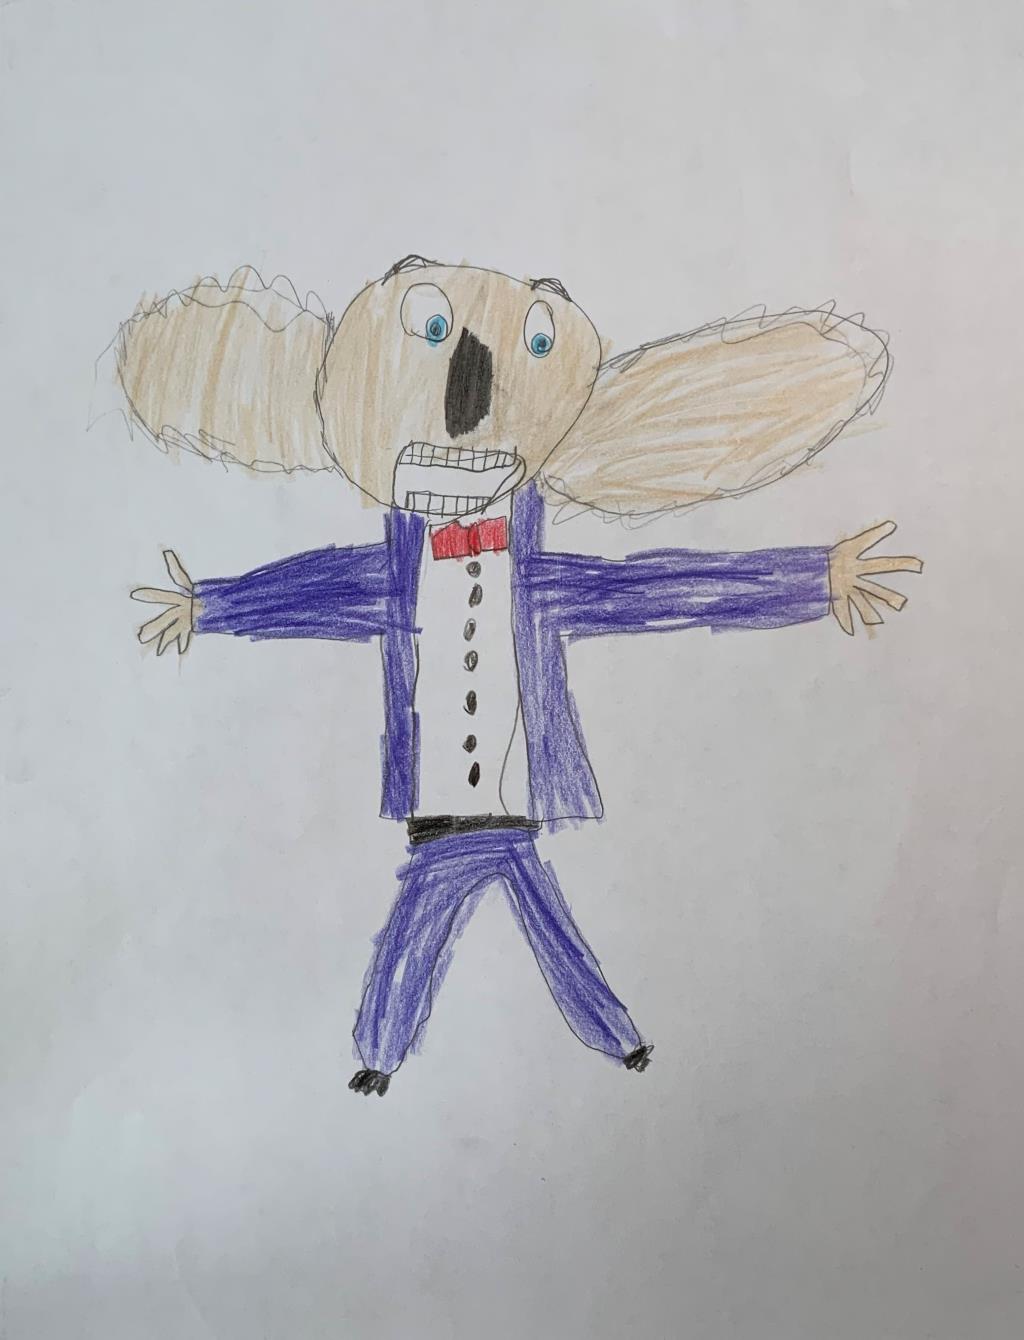 (age 7) "Bennet is a soon-to-be 2nd grader who enjoys art, playing, and watching movies. His favorite type of art is realistic people, animals, and characters. He is currently working on writing a book, a movie, and a play. He is quite busy!"